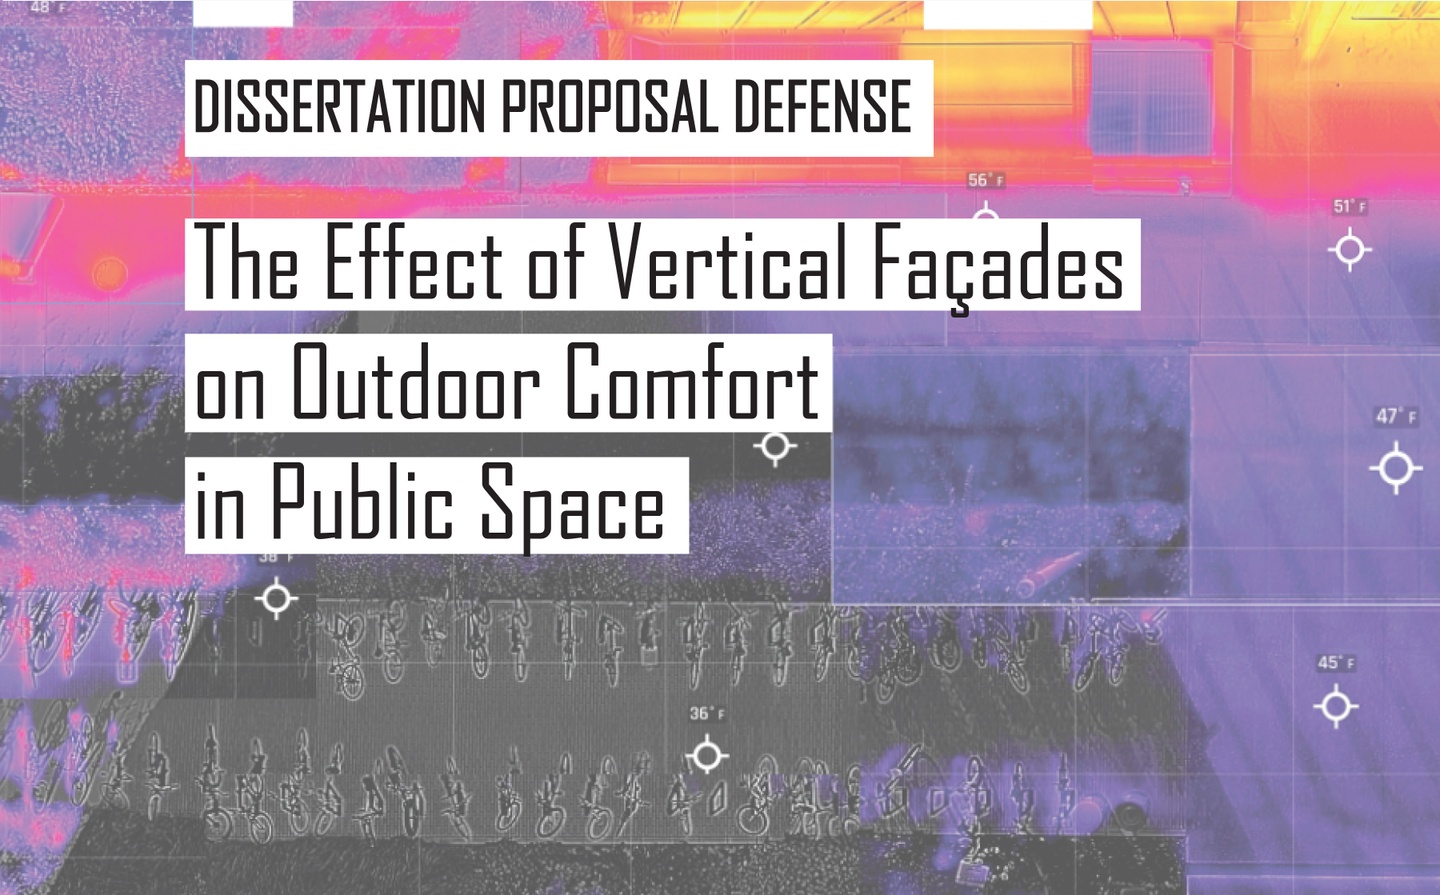 Patterned background of purple, bright pink, orange, yellow, and black, with white blocks containing black text that says Dissertation Proposal Defense: The Effects of Vertical Facades on Outdoor Comfort in Public Space